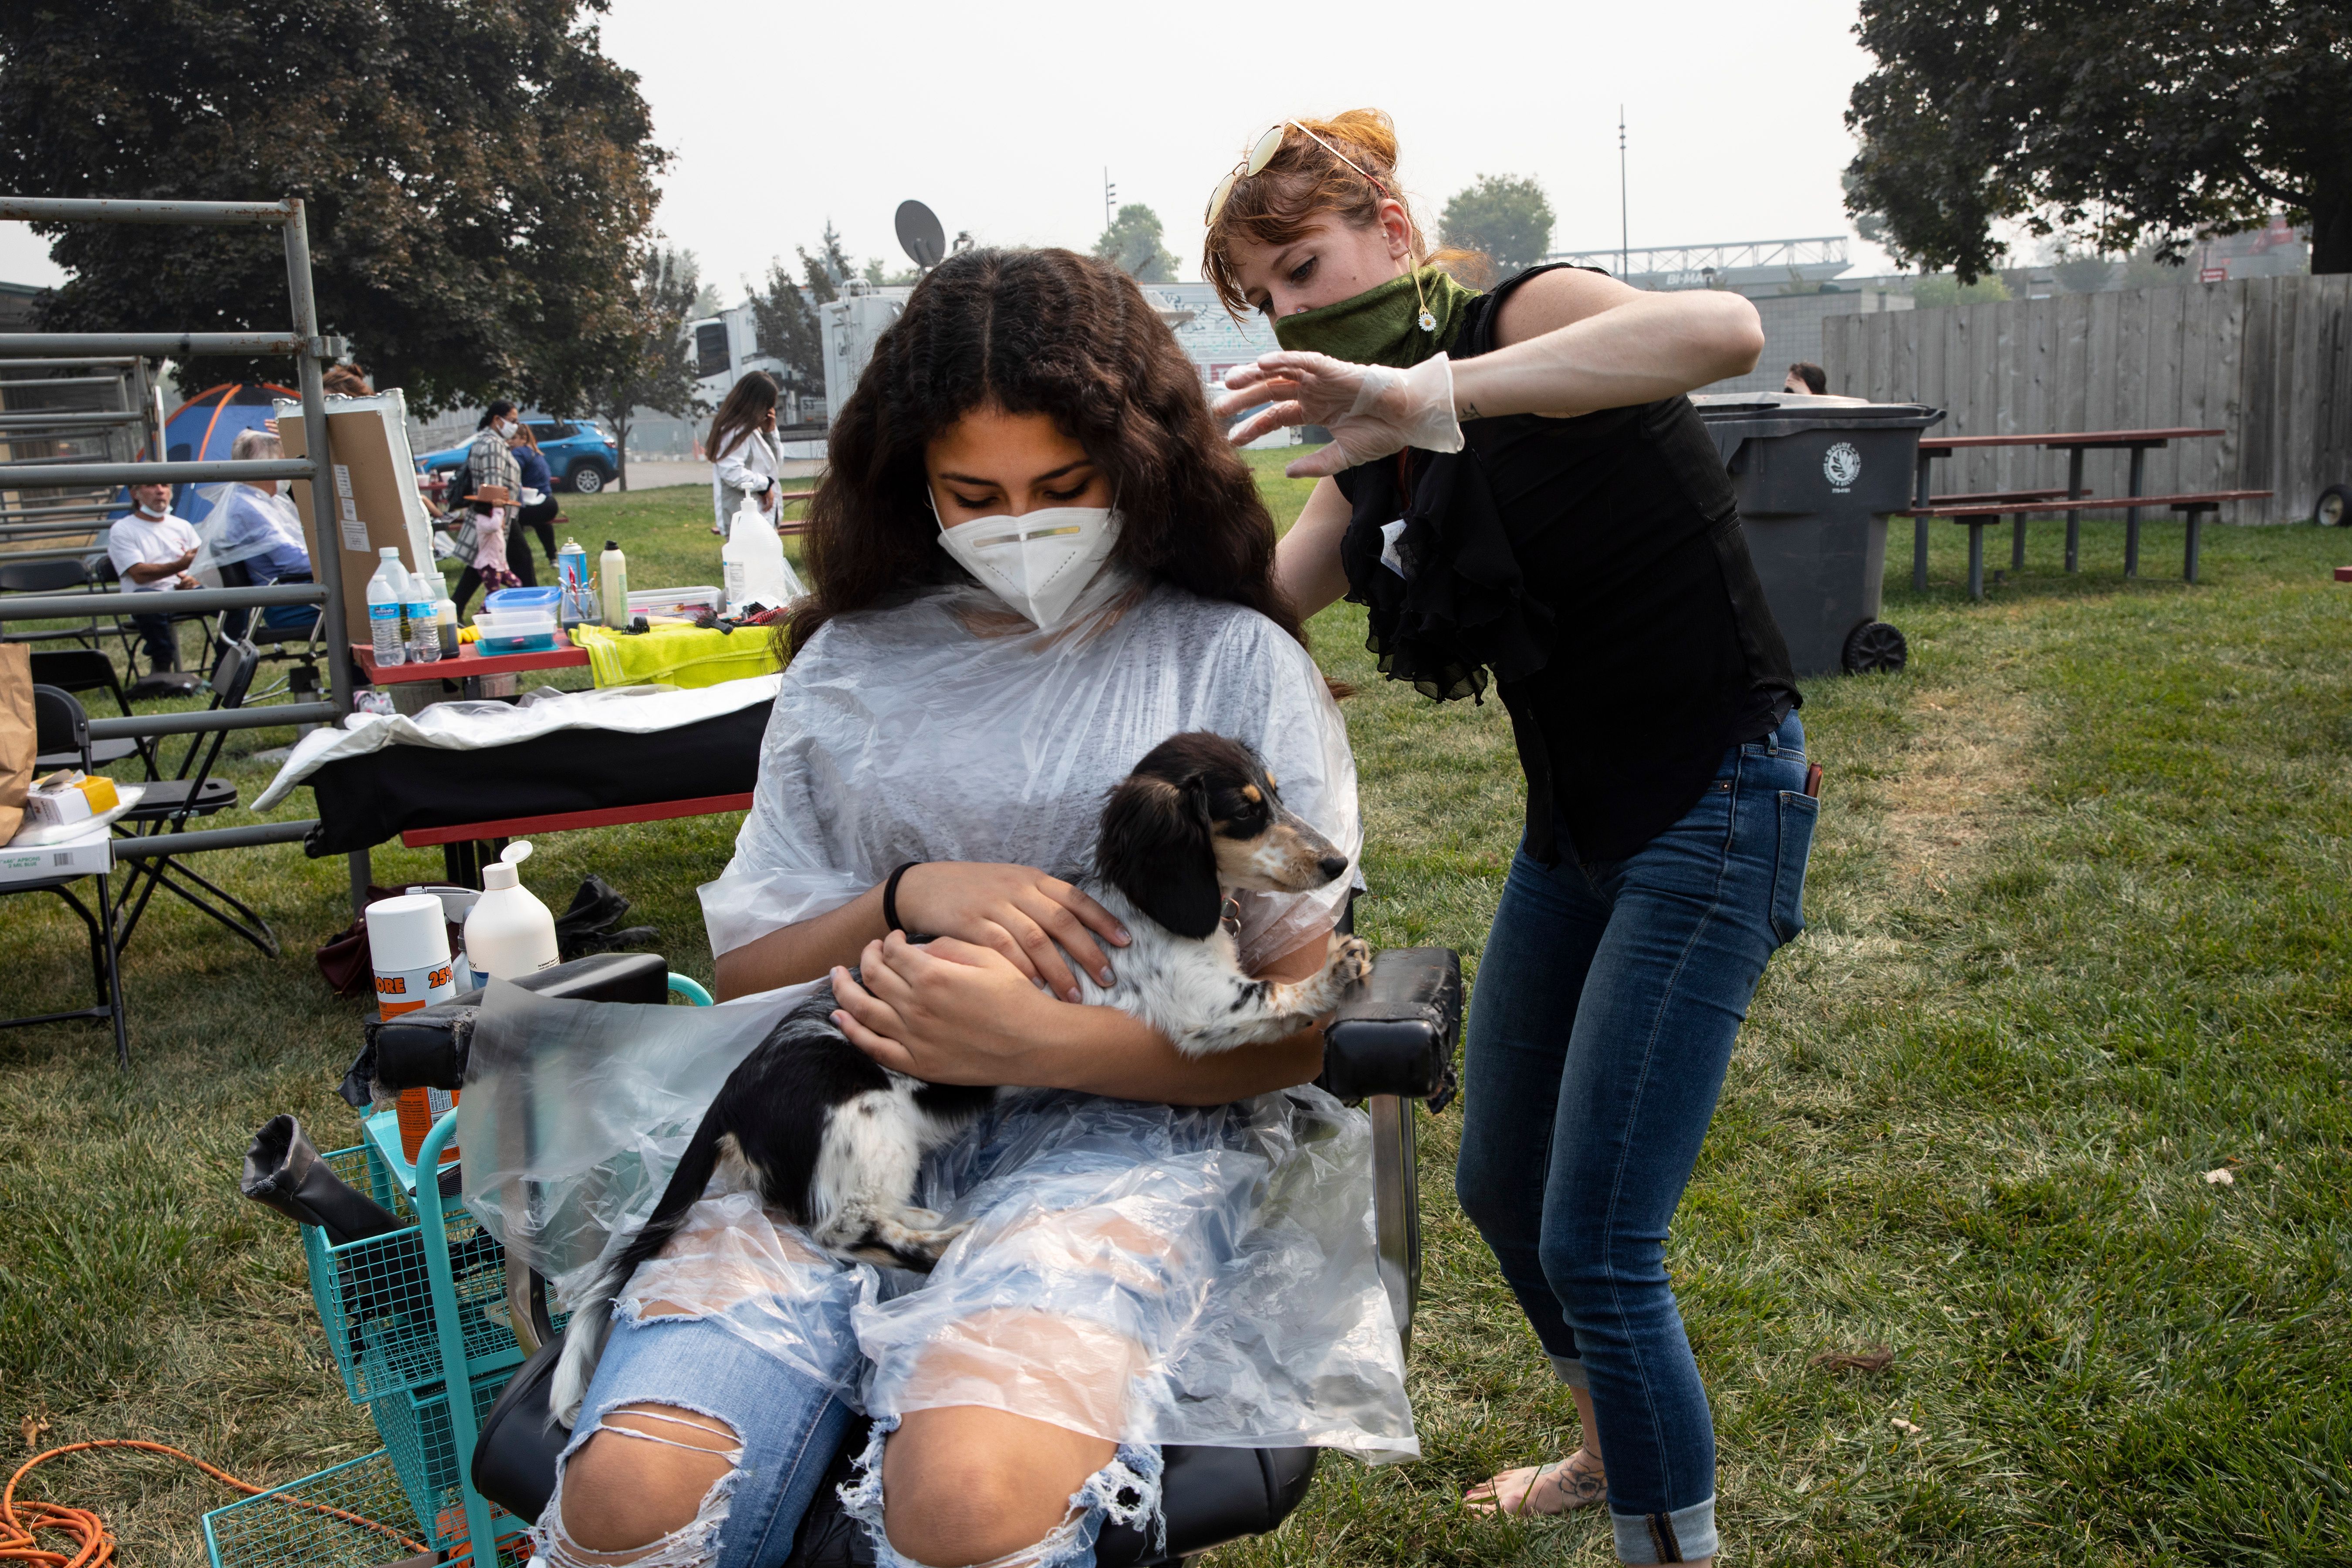 Brissia Rodriguez, 12, gets a free haircut from hairdresser Donnye Sabo, owner of Boho Bella Salon, at the evacuation center at the Jackson County Fairgrounds on September 16